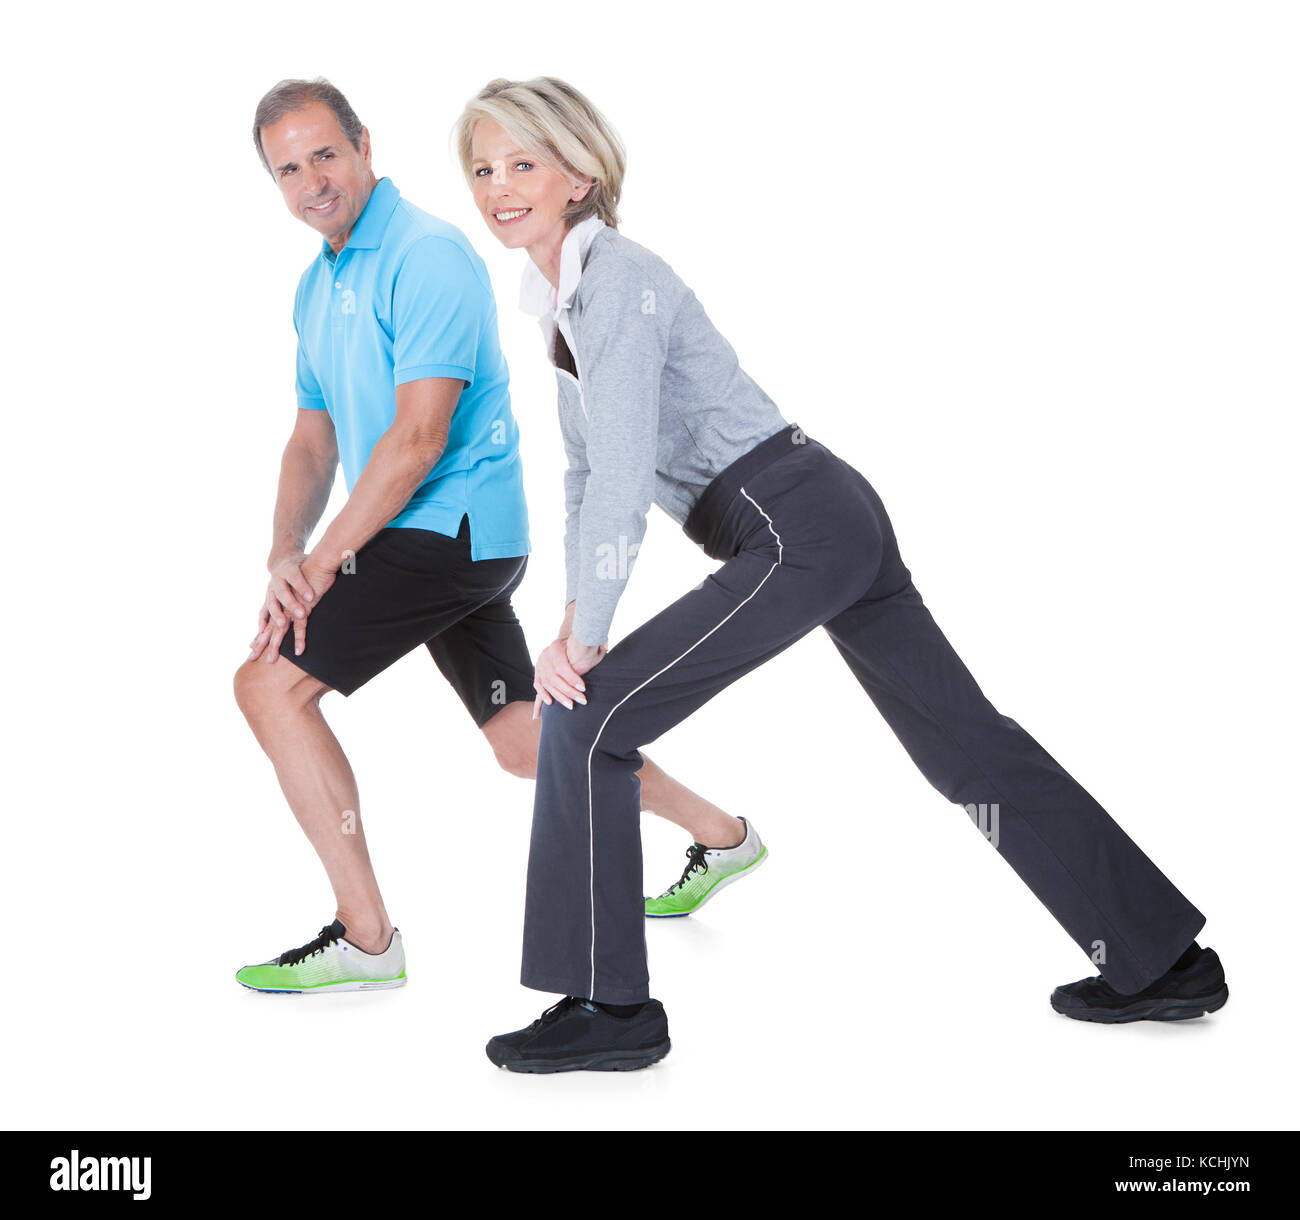 https://c8.alamy.com/comp/KCHJYN/happy-mature-couple-at-gym-in-fitness-attire-exercising-on-white-background-KCHJYN.jpg